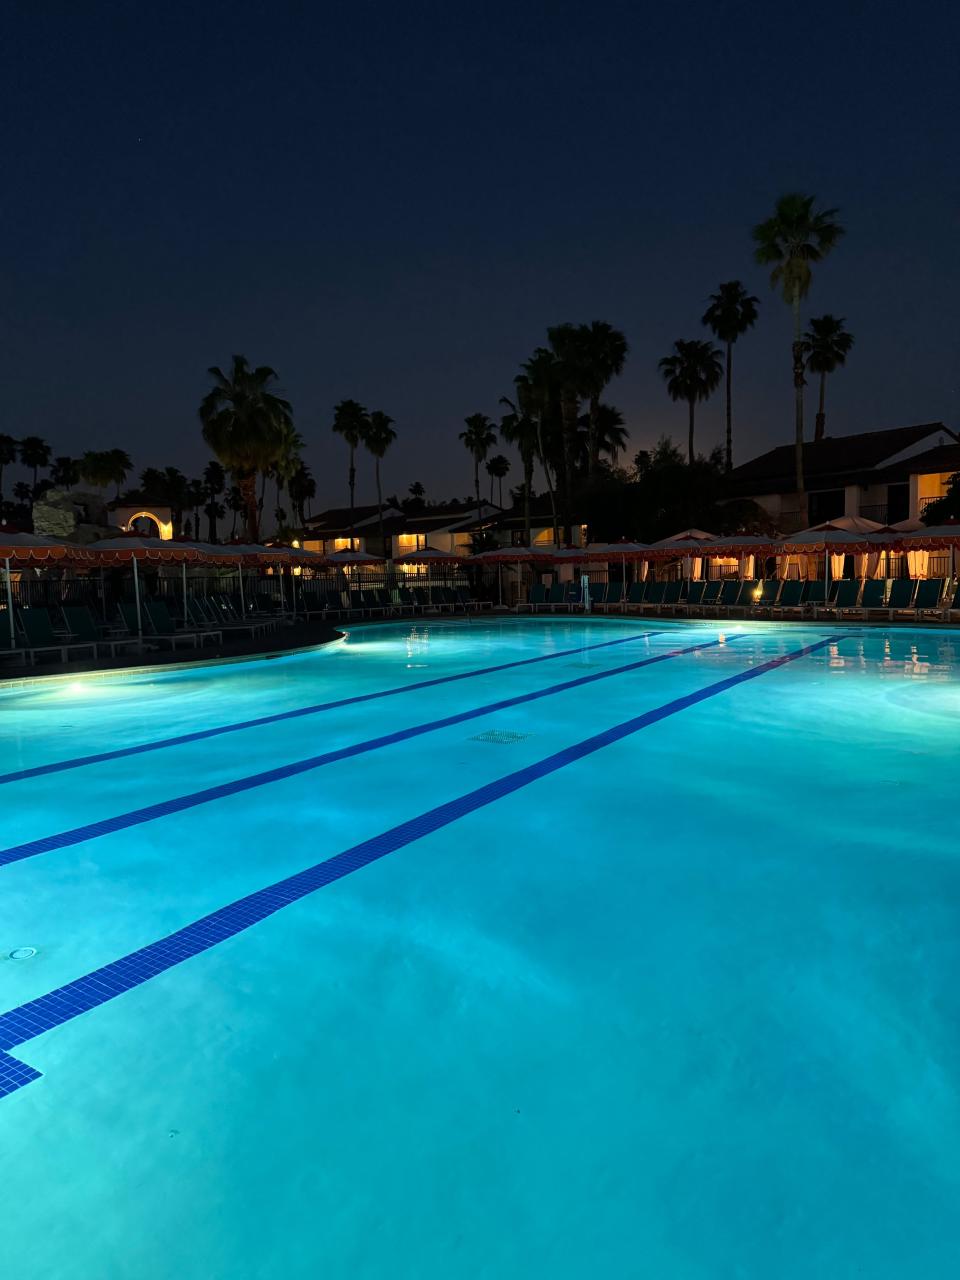 Swimming pool with lanes at dusk, surrounded by palm trees and buildings